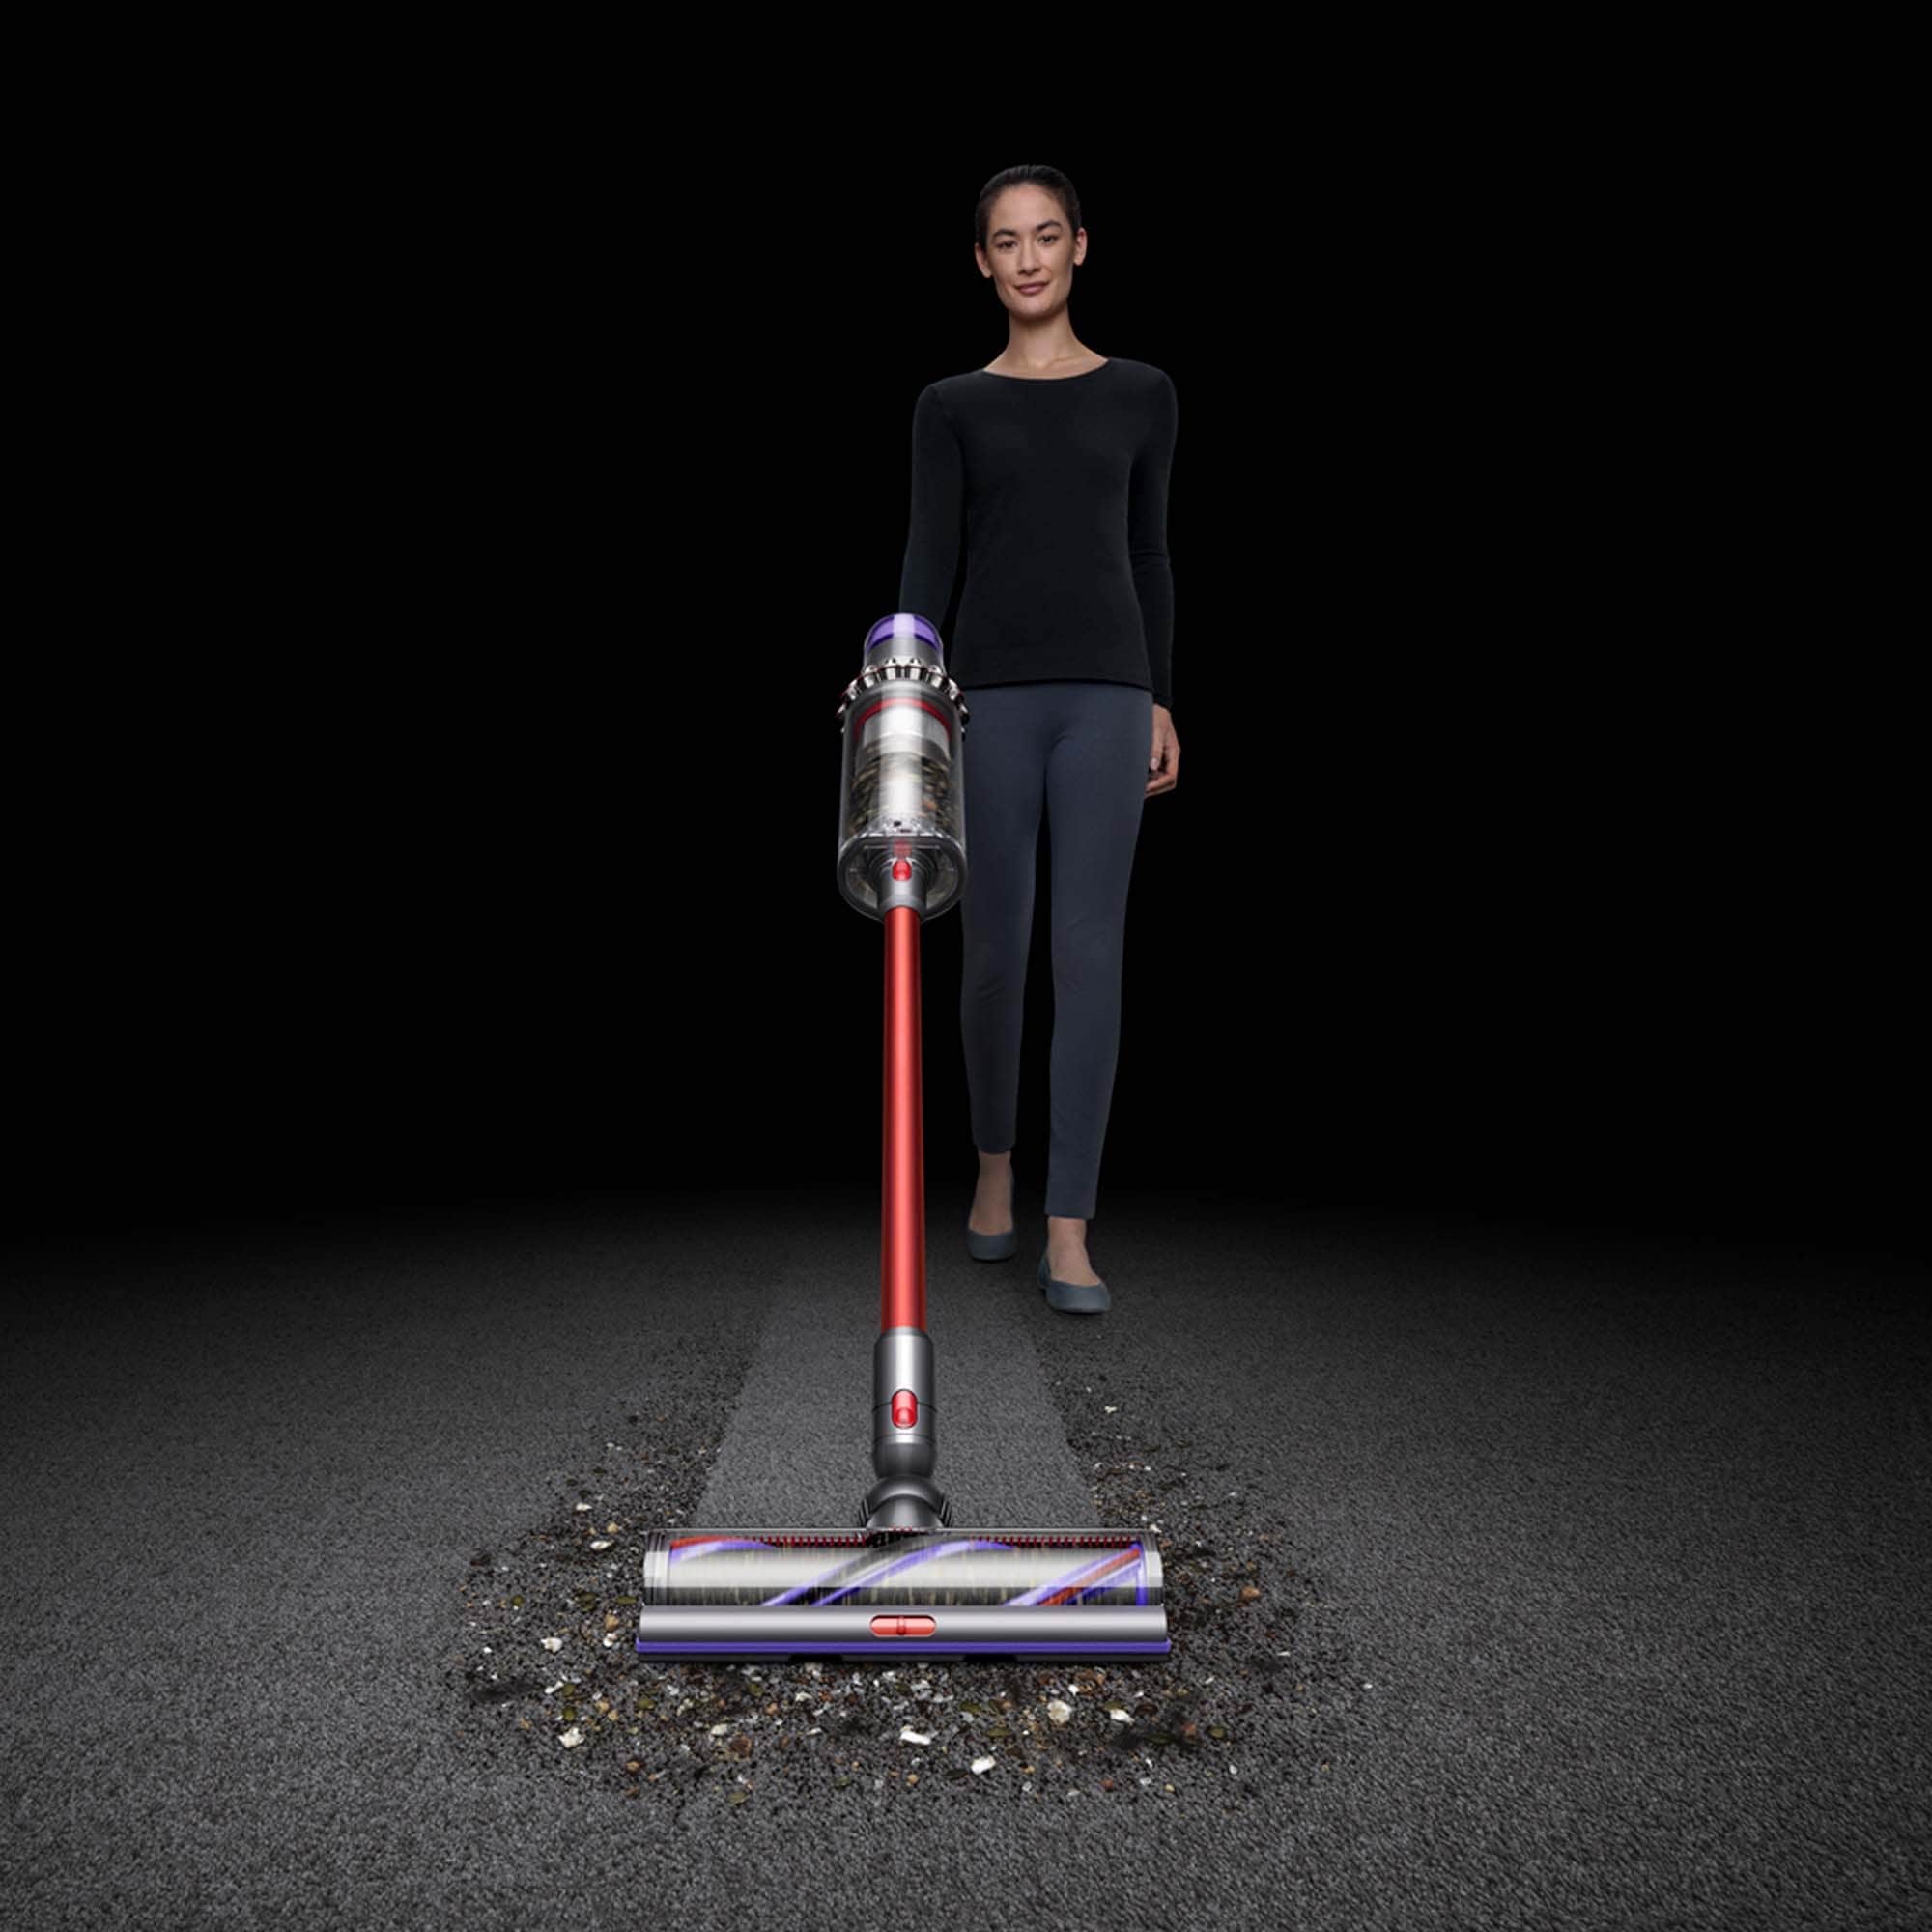 Dyson V12 Detect Slim Absolute Cordless Stick Vacuum - Nickel - Wilson  Electrical